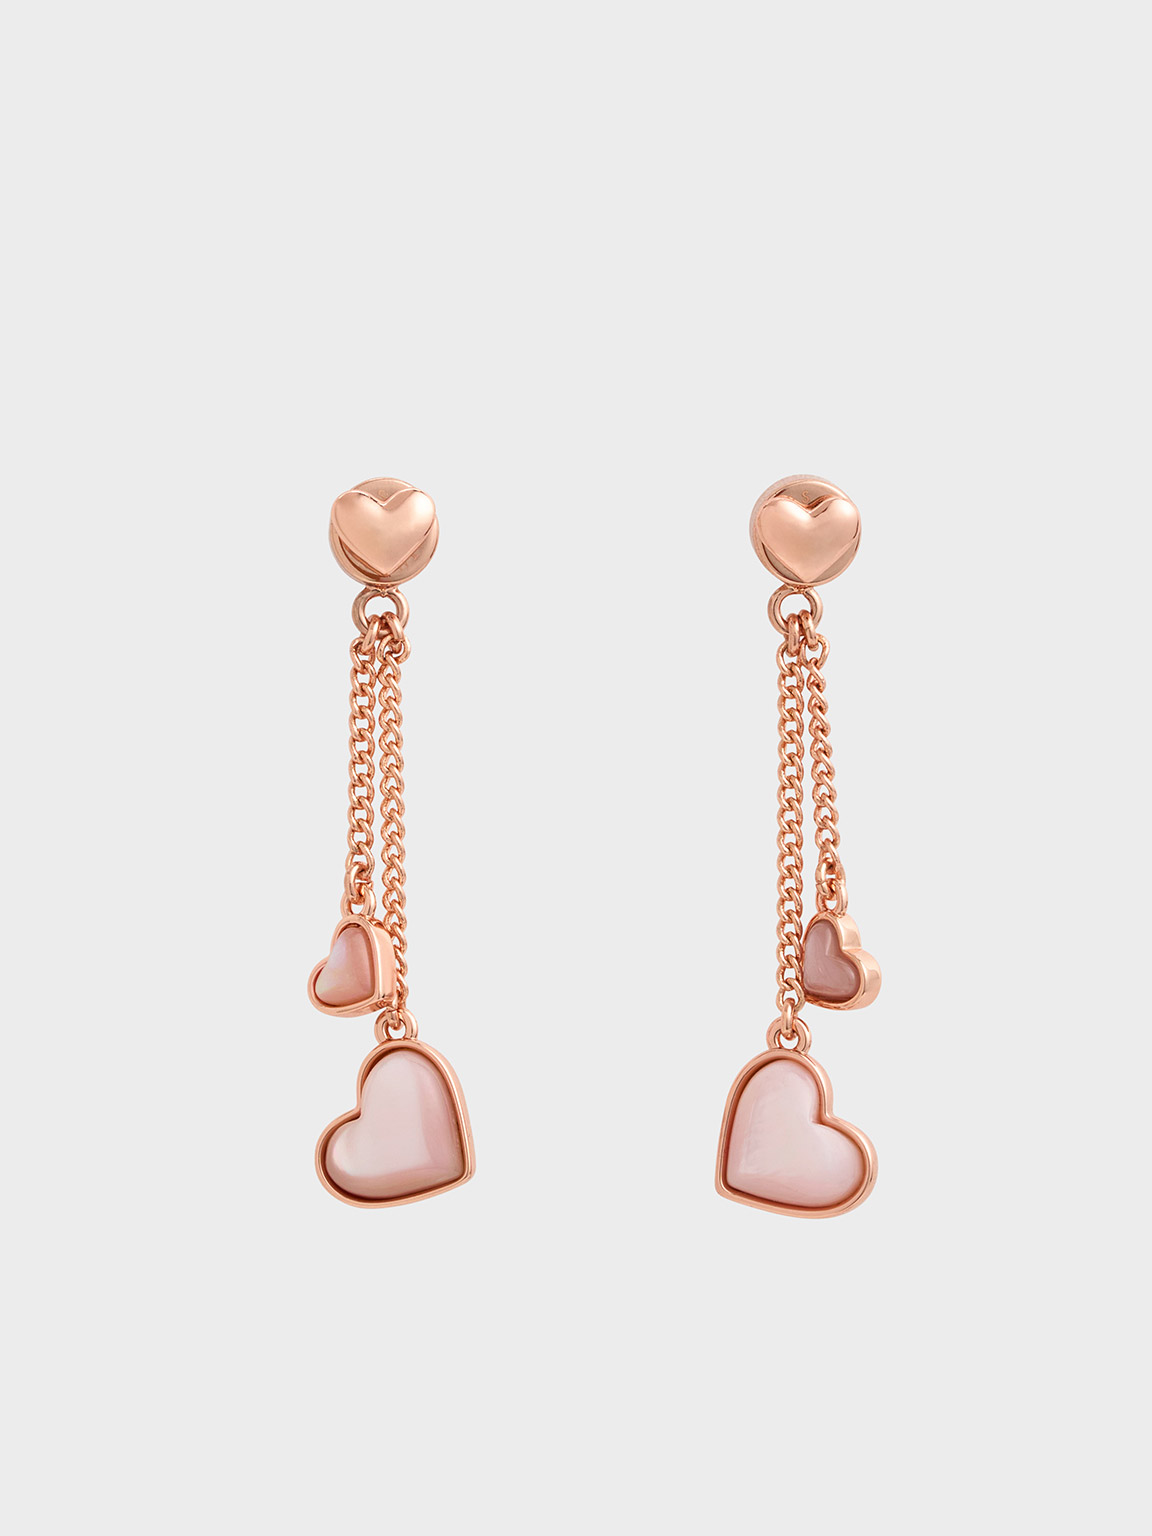 Rose Gold Stone - CHARLES Earrings Drop KEITH Annalise Double & Heart IE